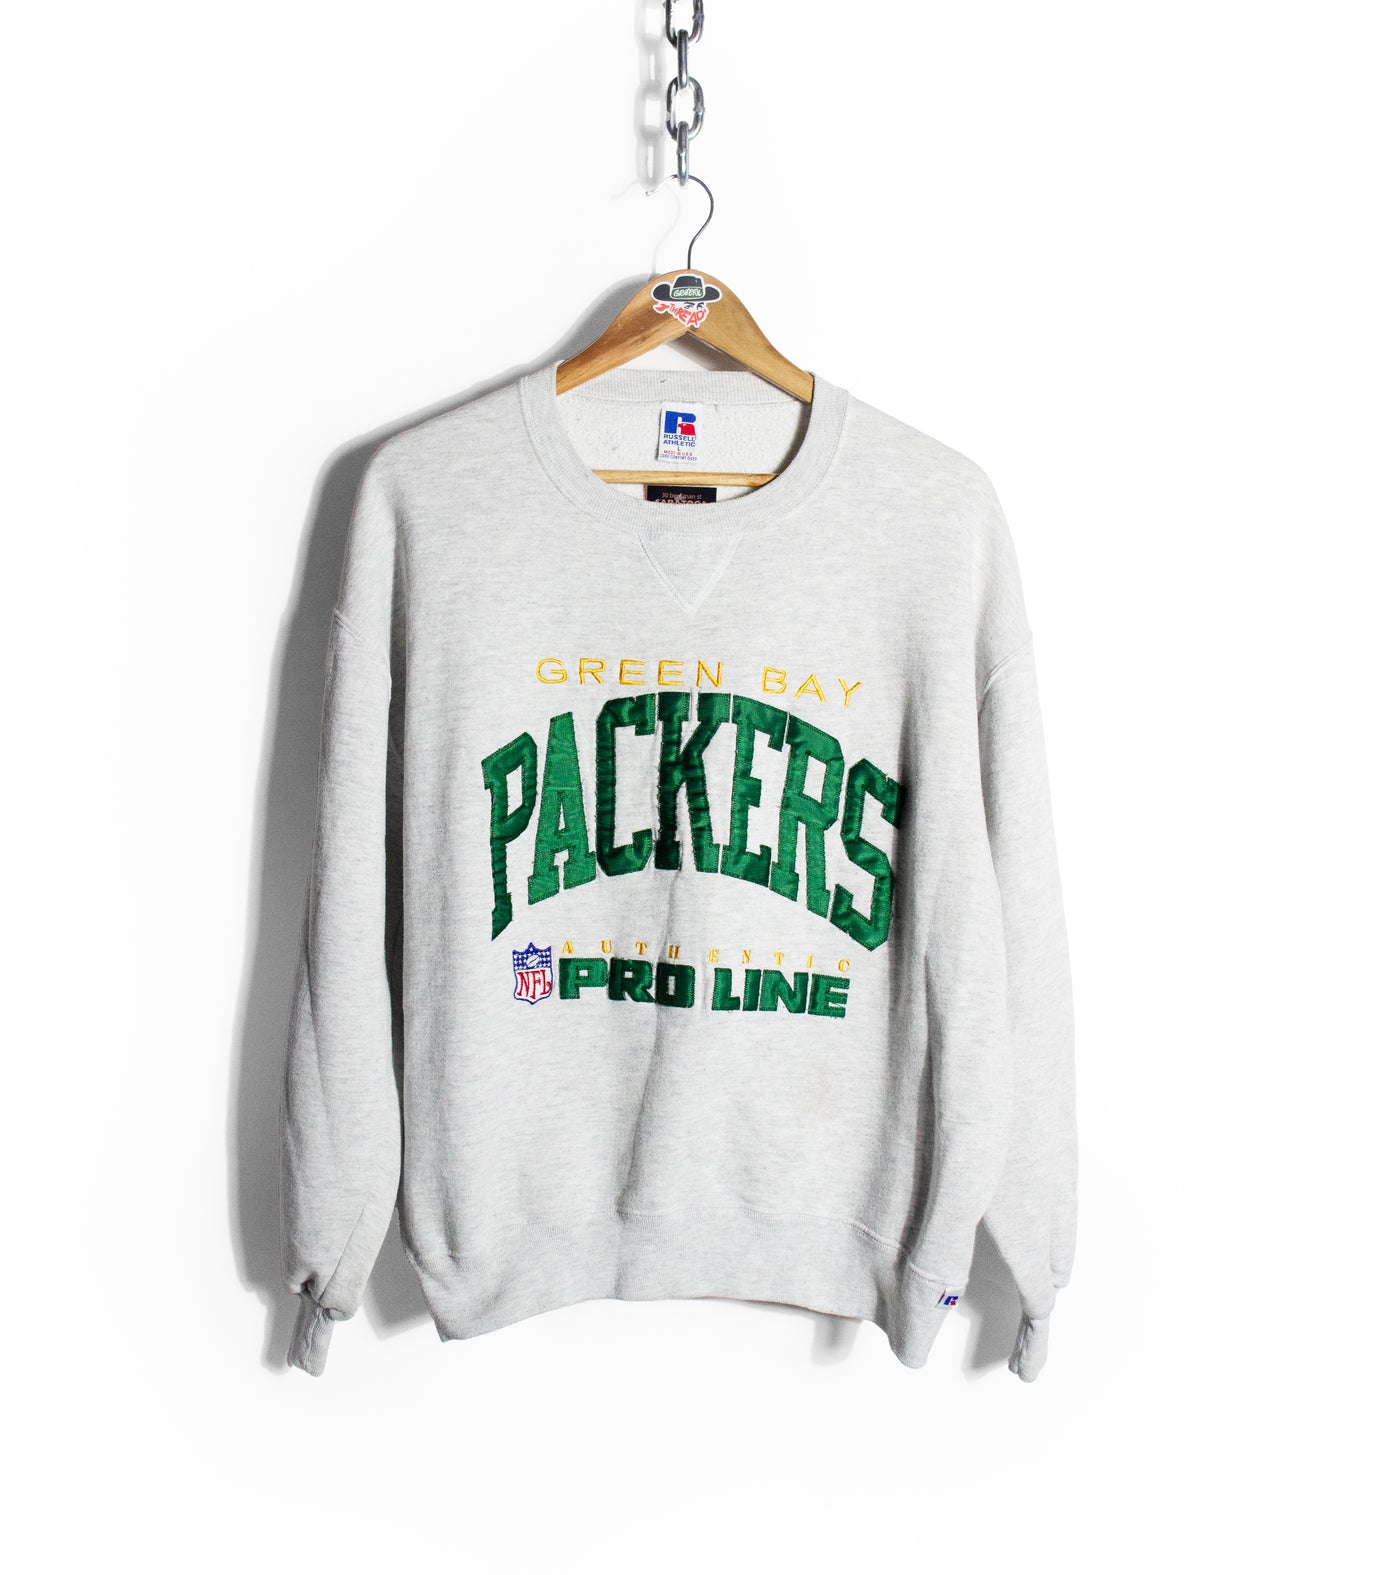 Vintage 90s Green Bay Packers Russell Pro Line Crewneck